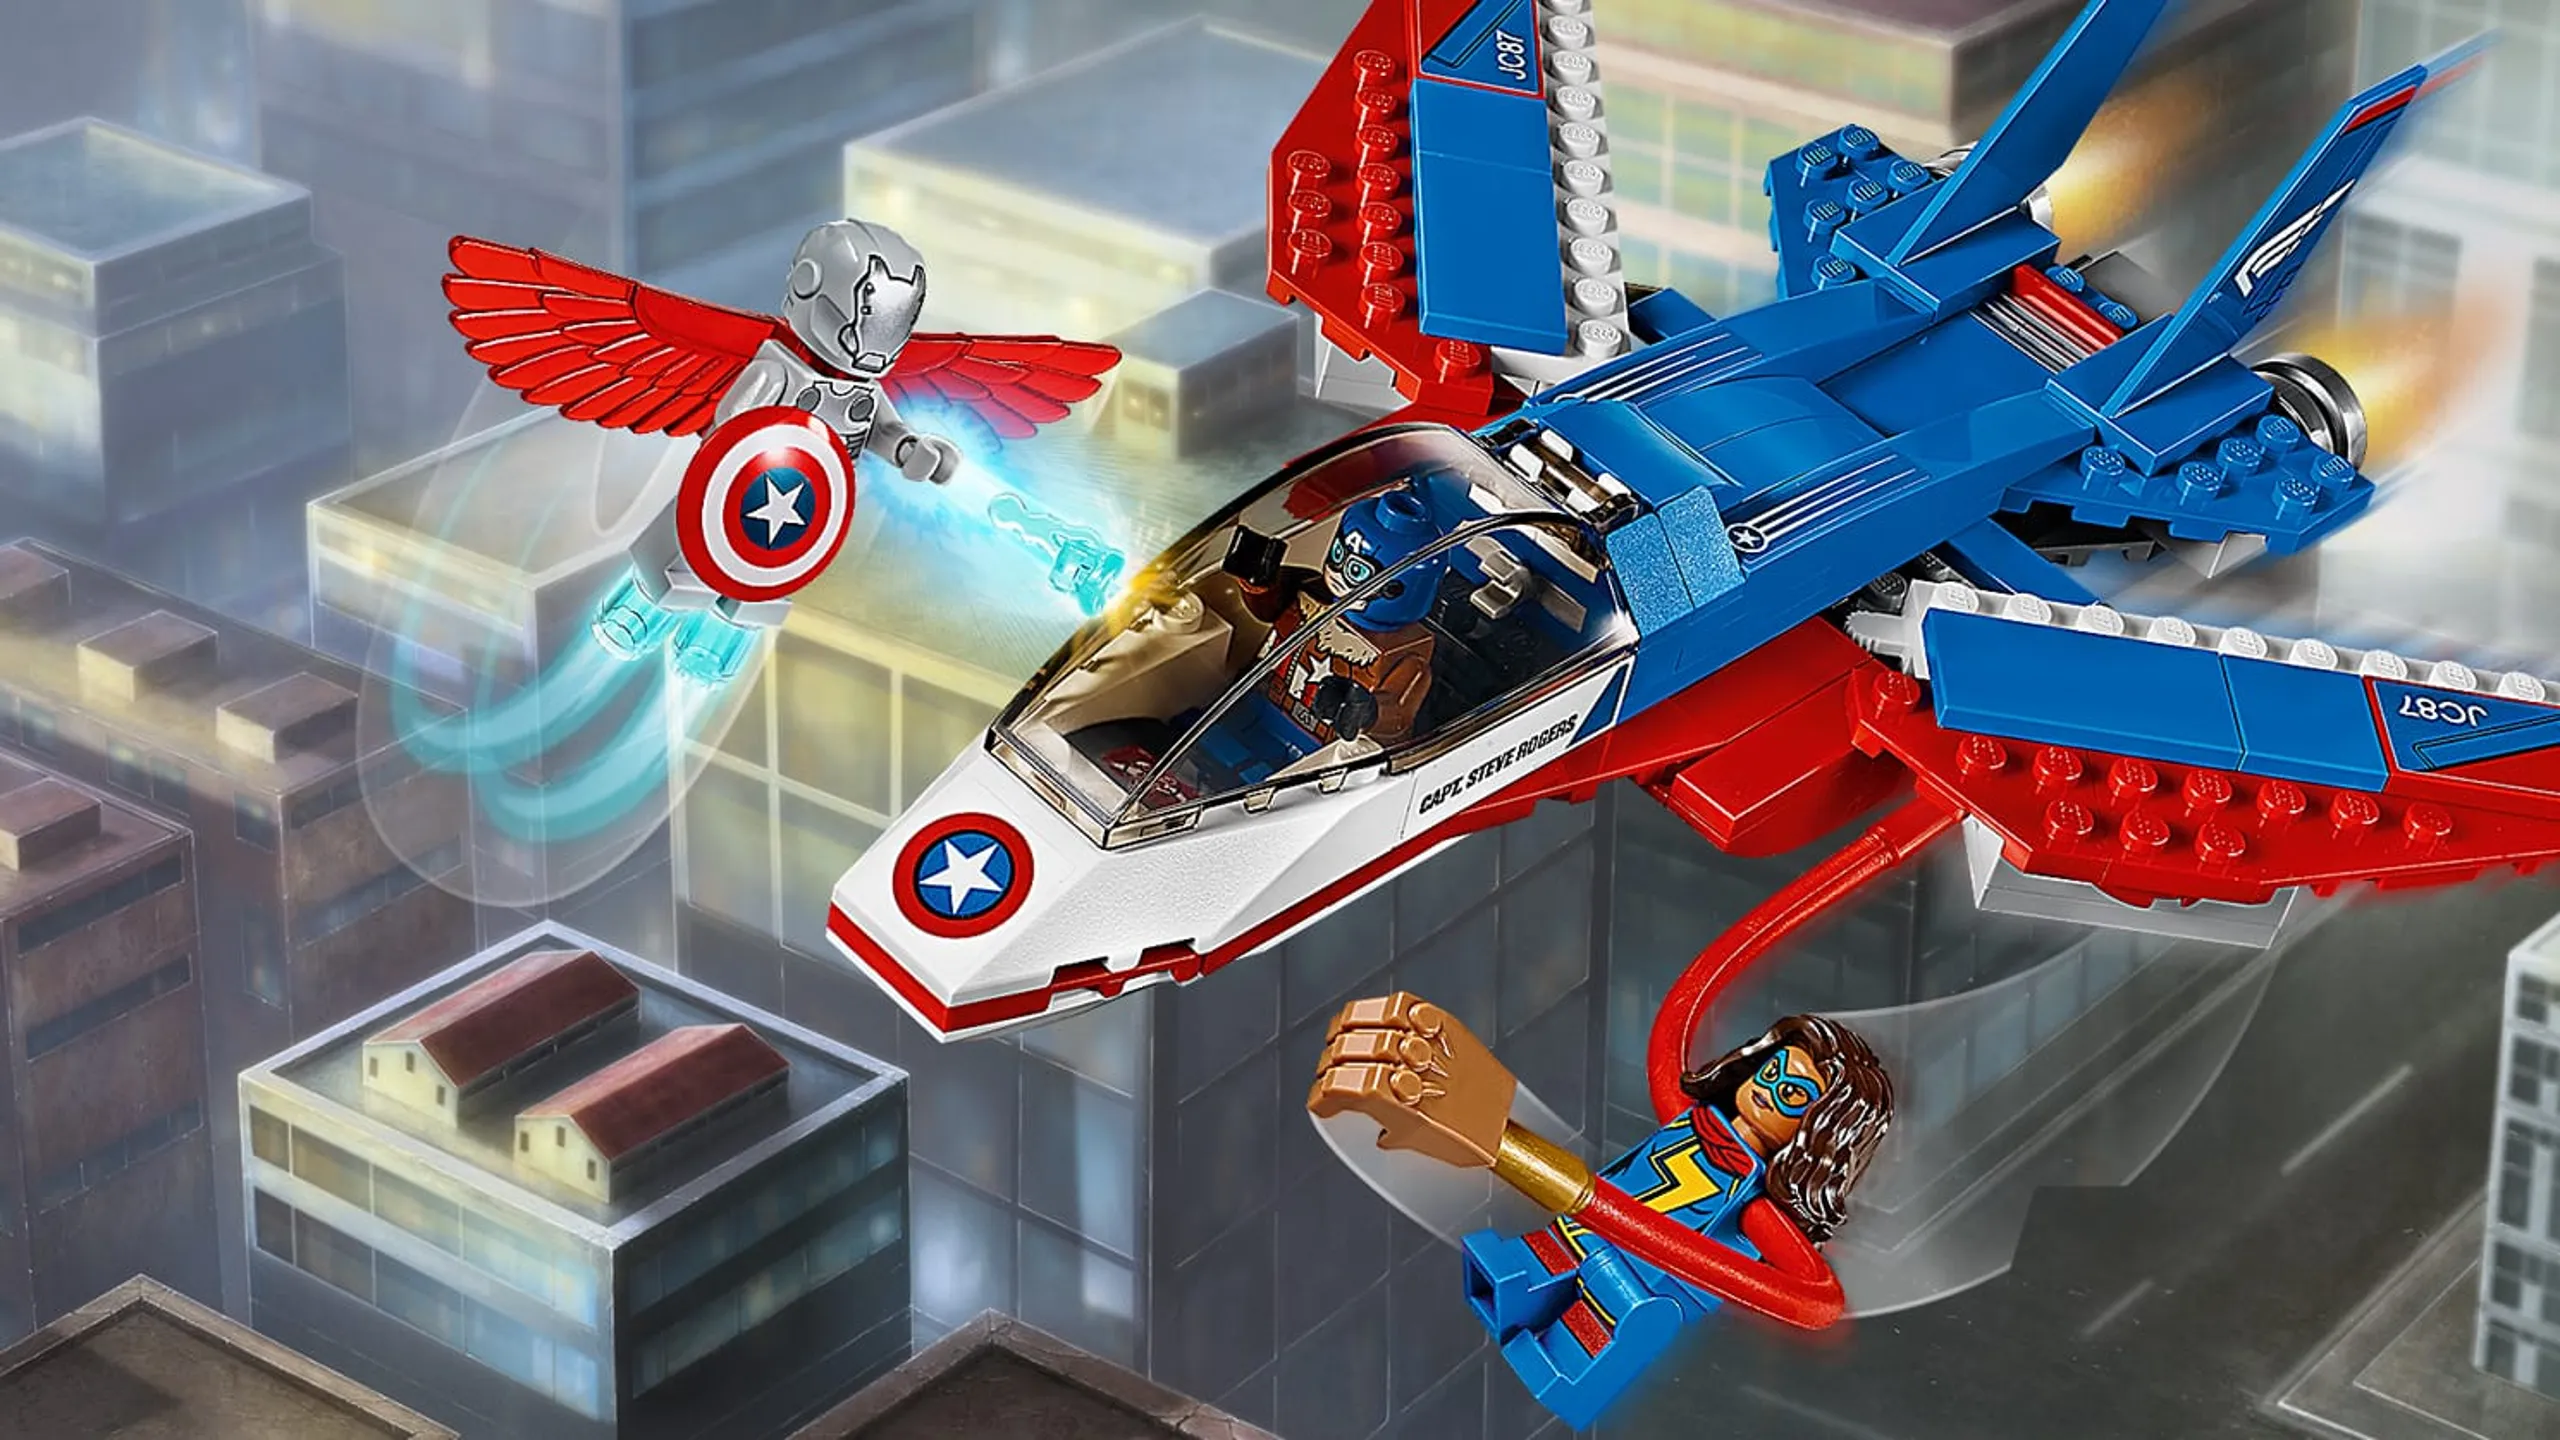 LEGO Super Heroes - 76076 Captain America Jet Pursuit - Super-Adaptoid has stolen Captain America's shield. Help him get it back with his jet and Ms. Marvel and her stretching arms.